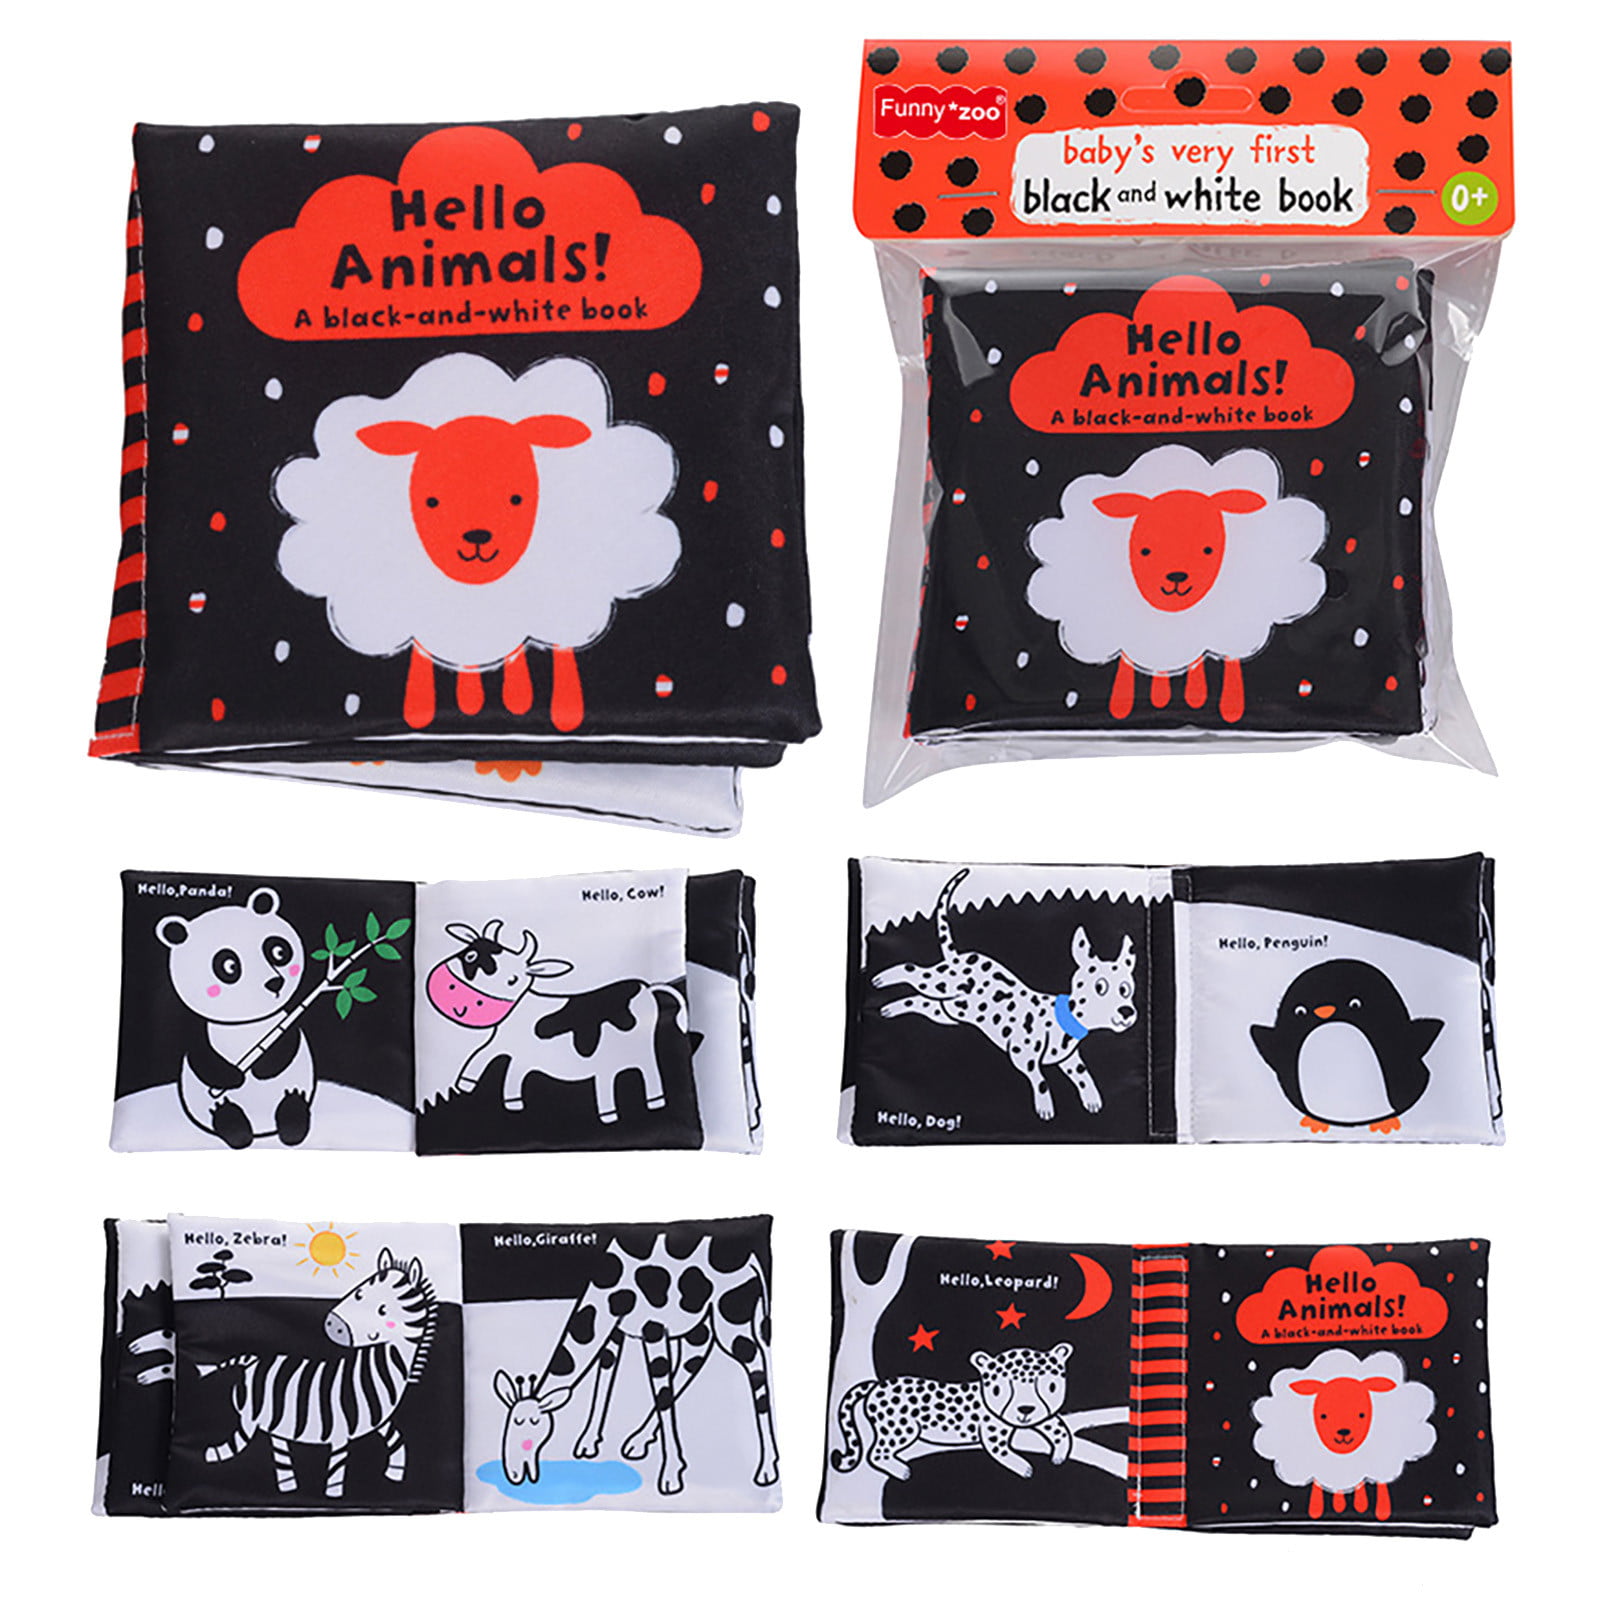 Intelligence development Soft 3D Animal Cloth Crinkle Book Baby Cognize Toy Gift 